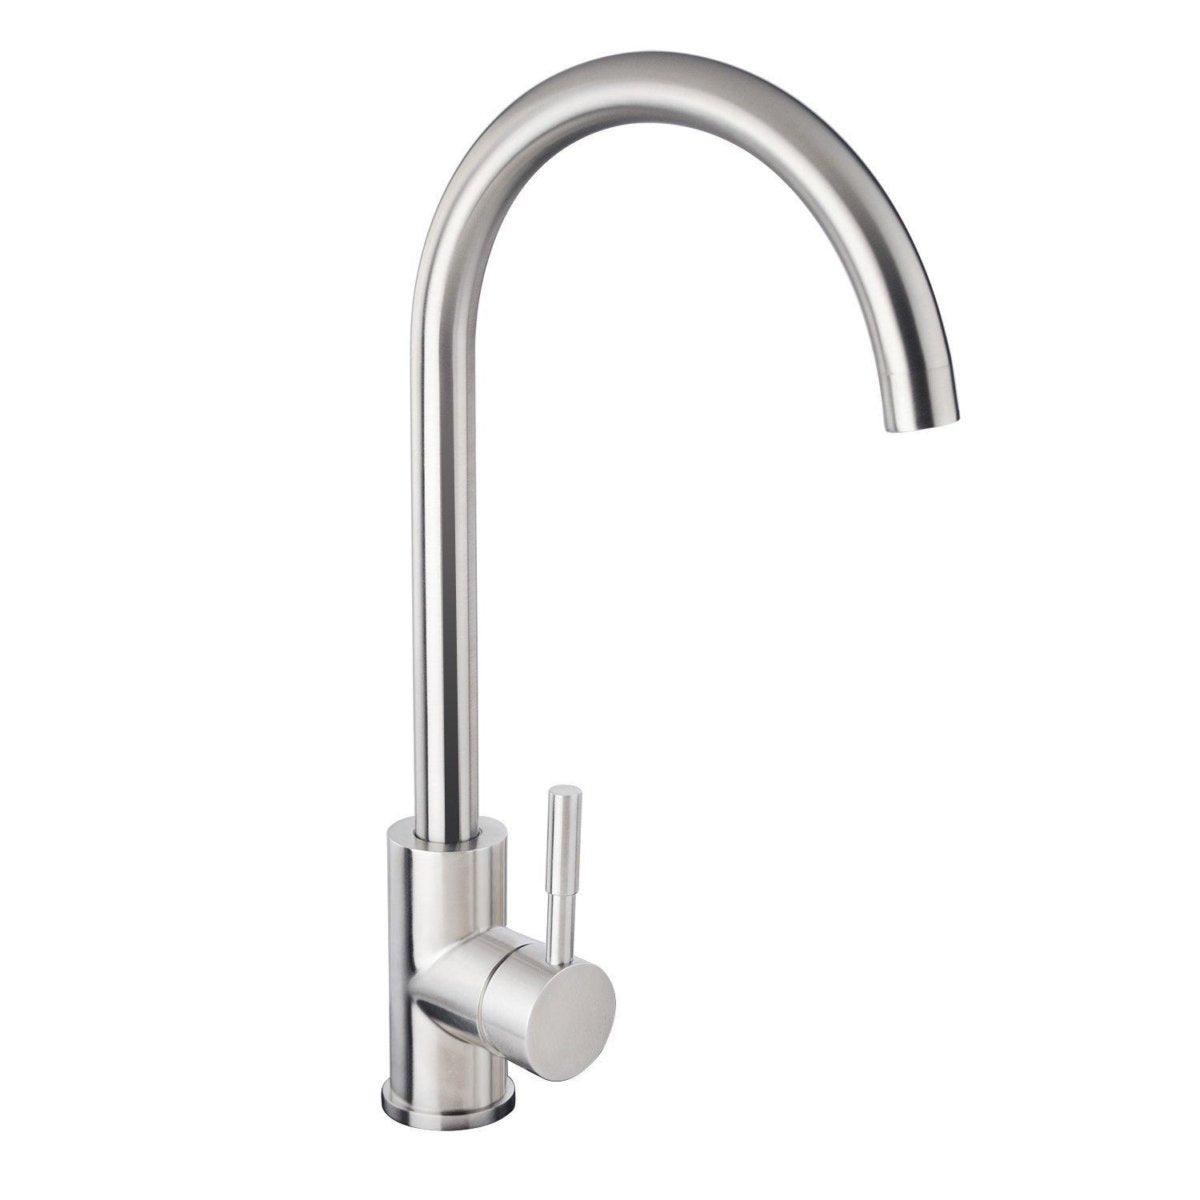 Elle Project 304 Stainless Steel Sink Mixer